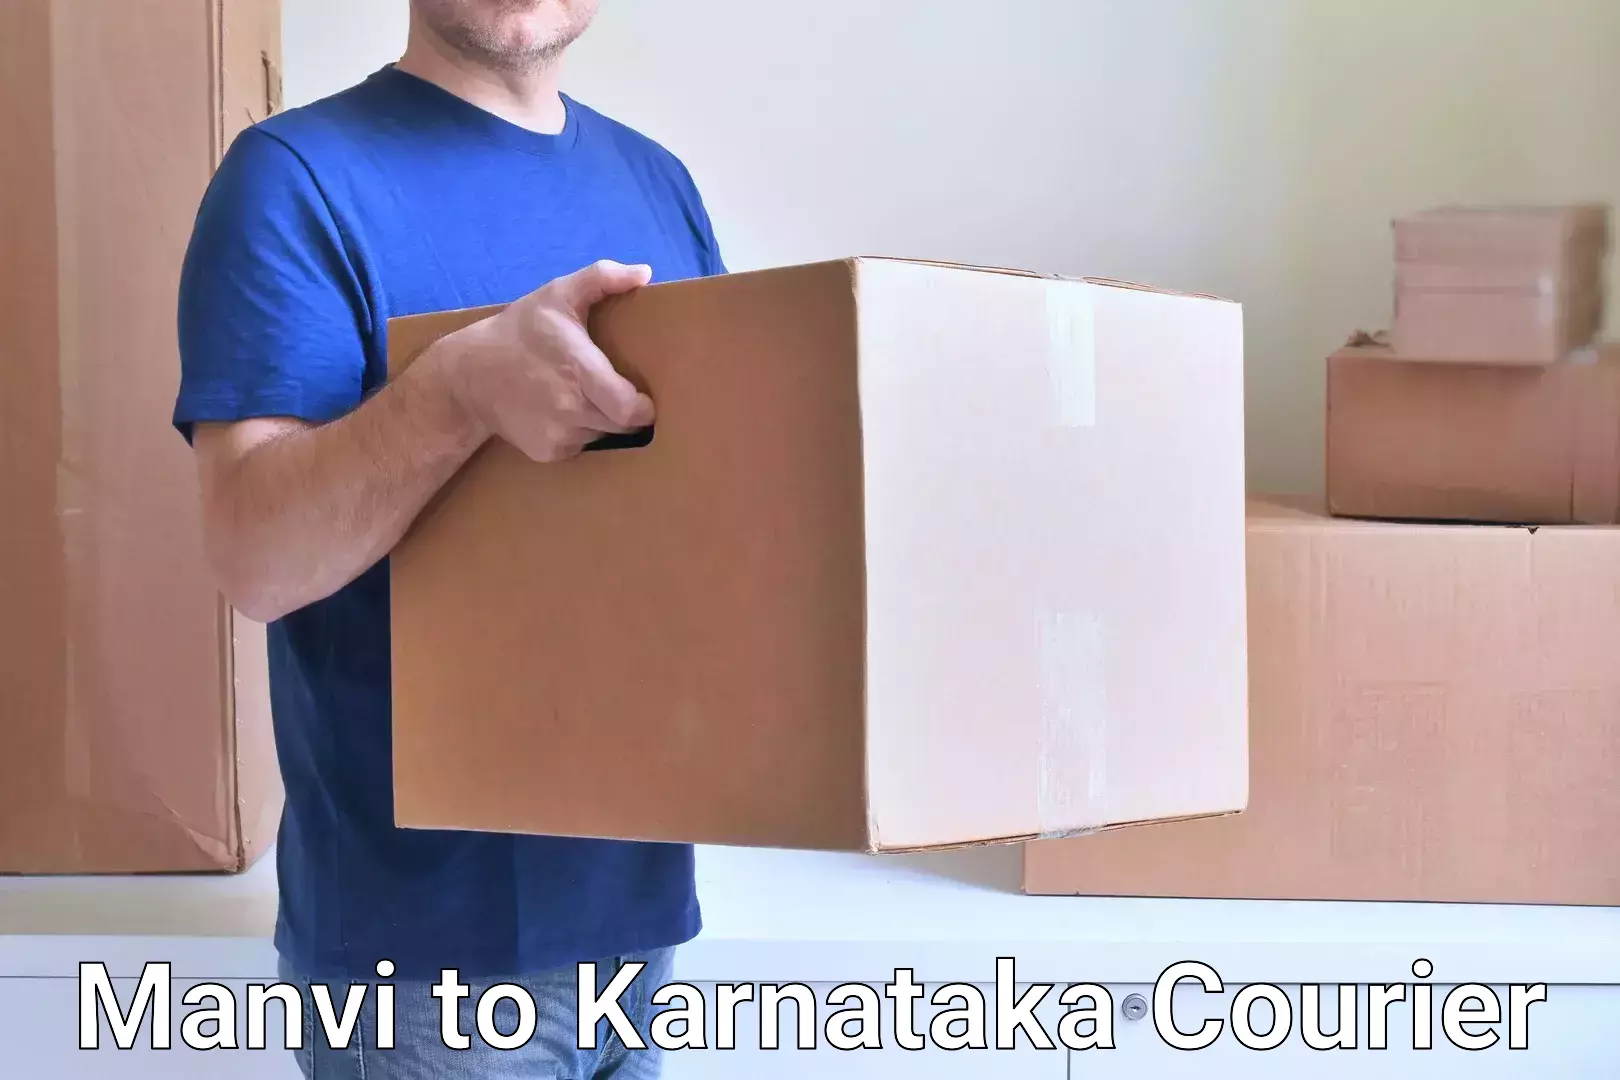 State-of-the-art courier technology Manvi to Alnavar